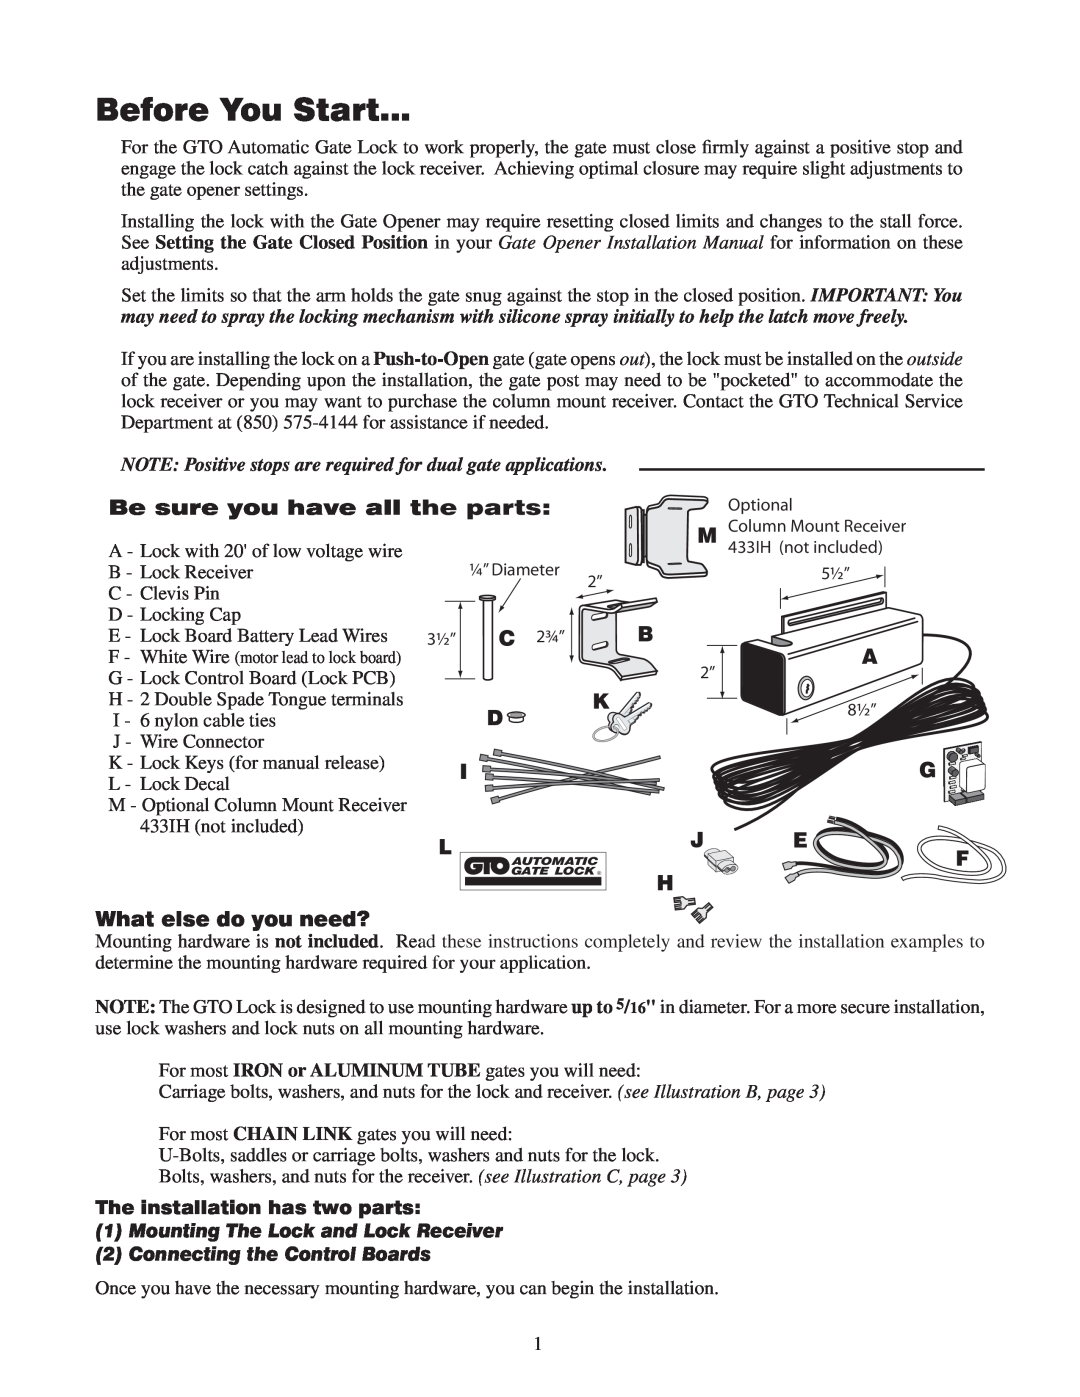 GTO RB909 installation manual Before You Start, Be sure you have all the parts, What else do you need? 